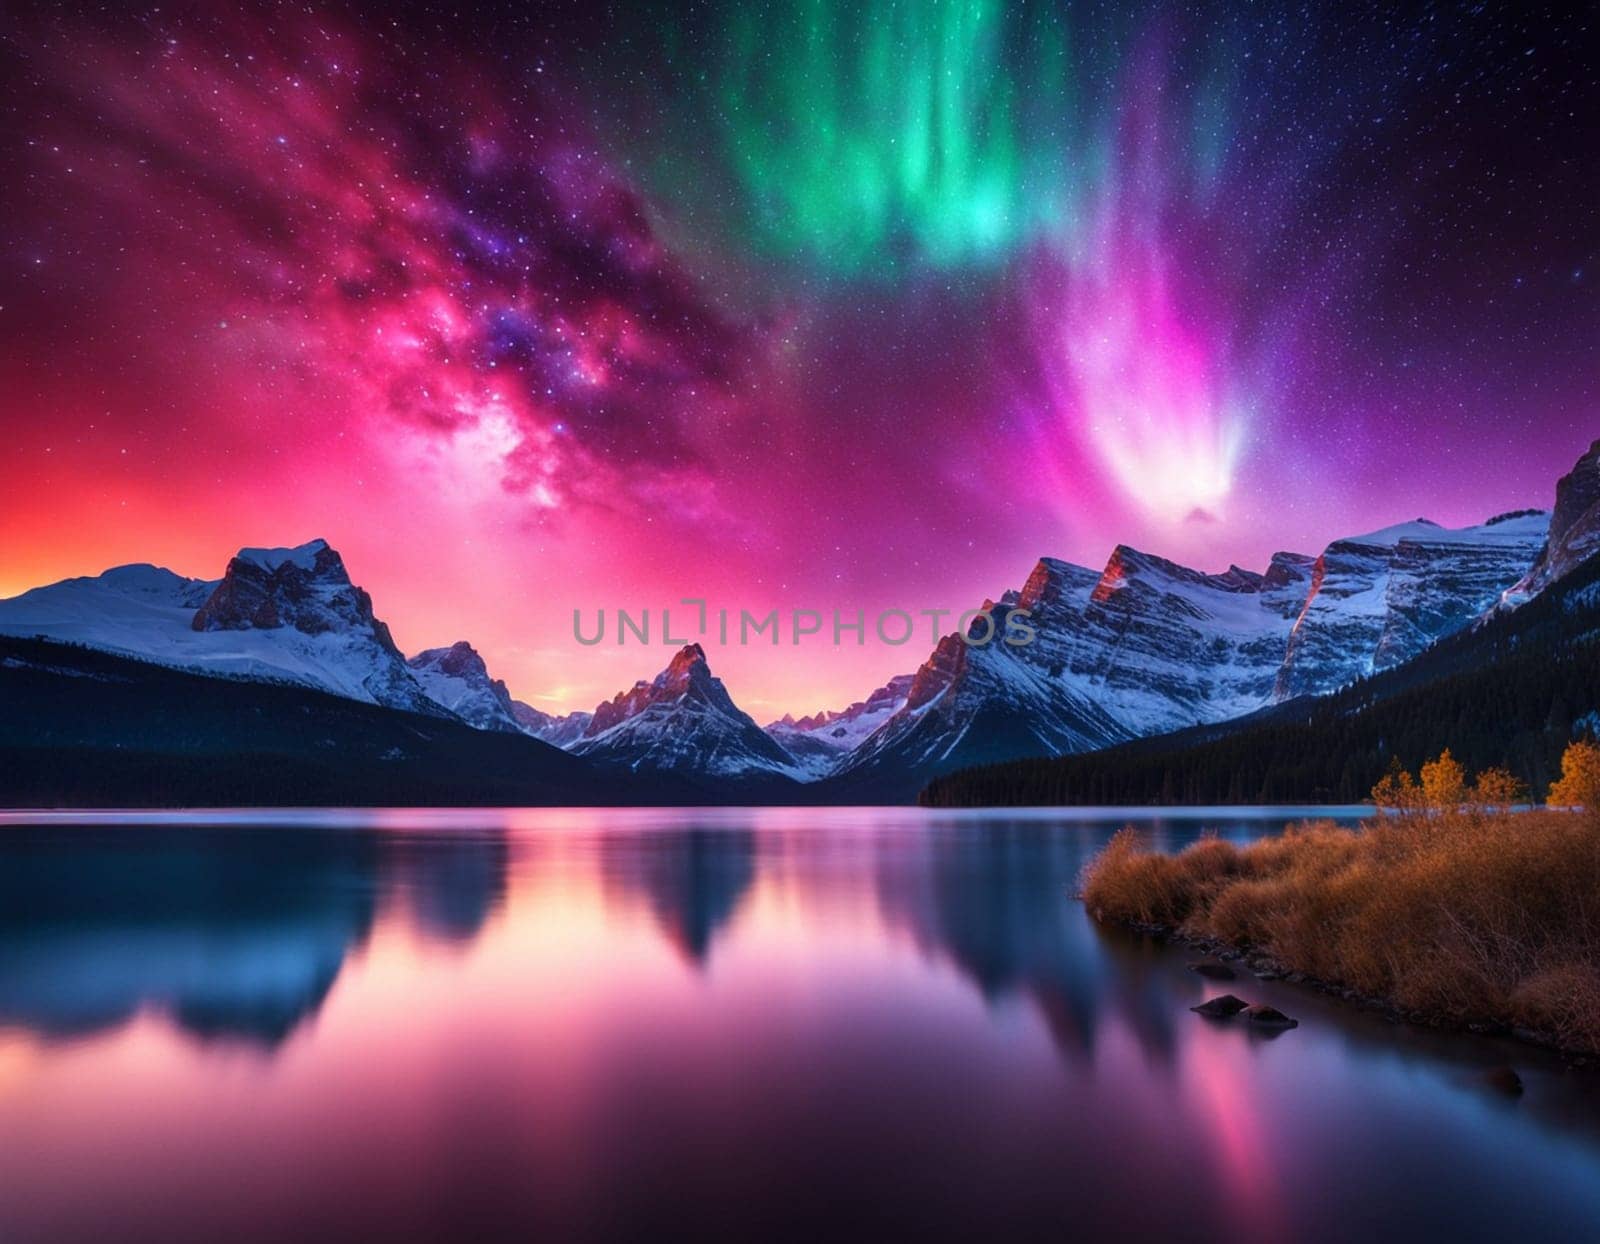 Colorful landscape and red northern lights on the starry sky. High quality illustration